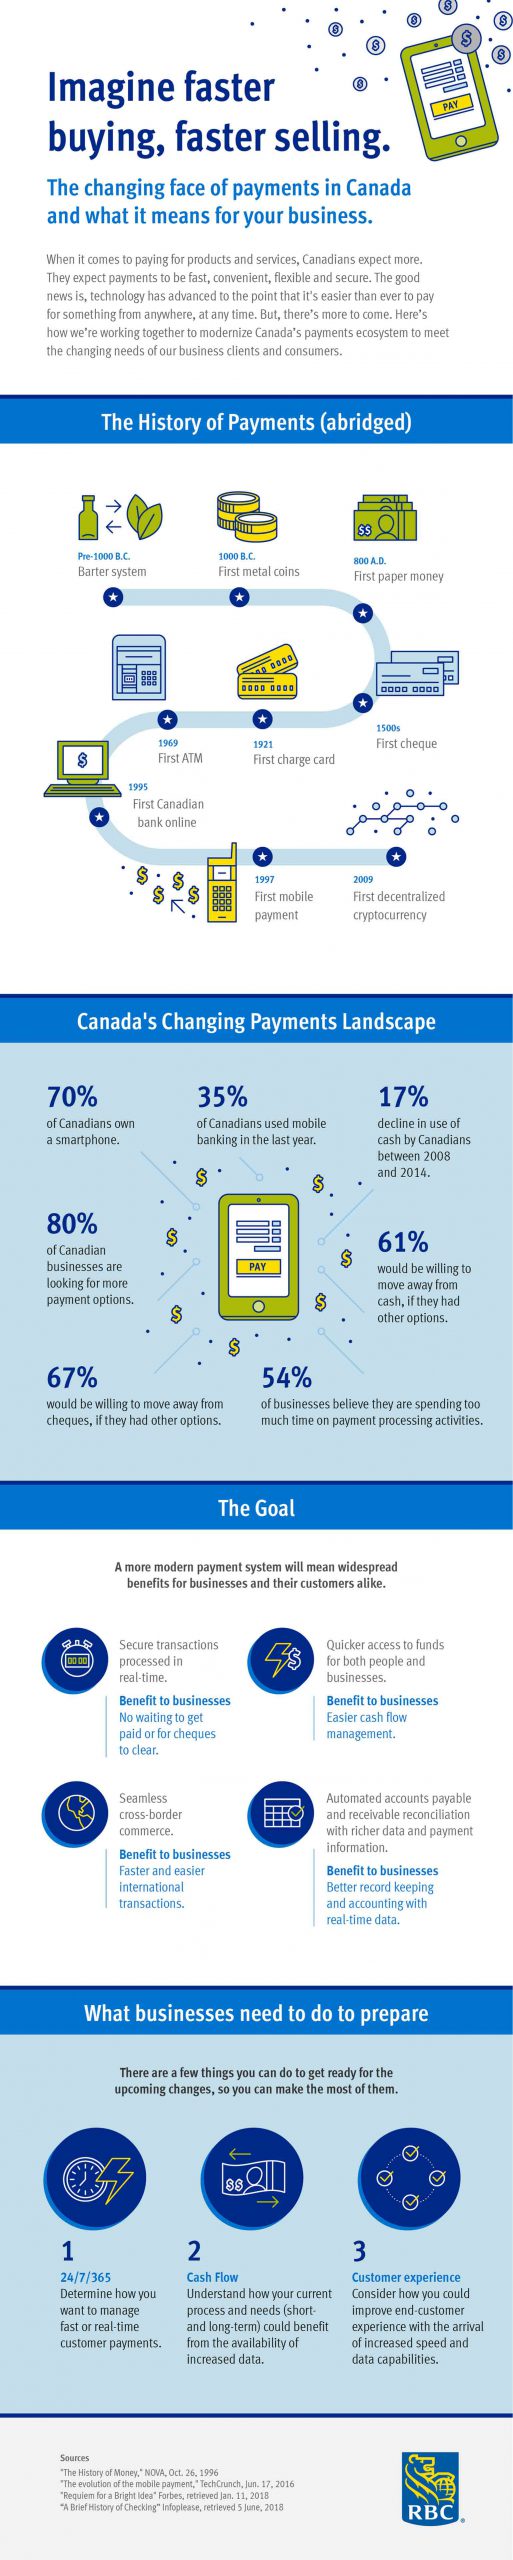 The changing face of payments in Canada and what it means for your business